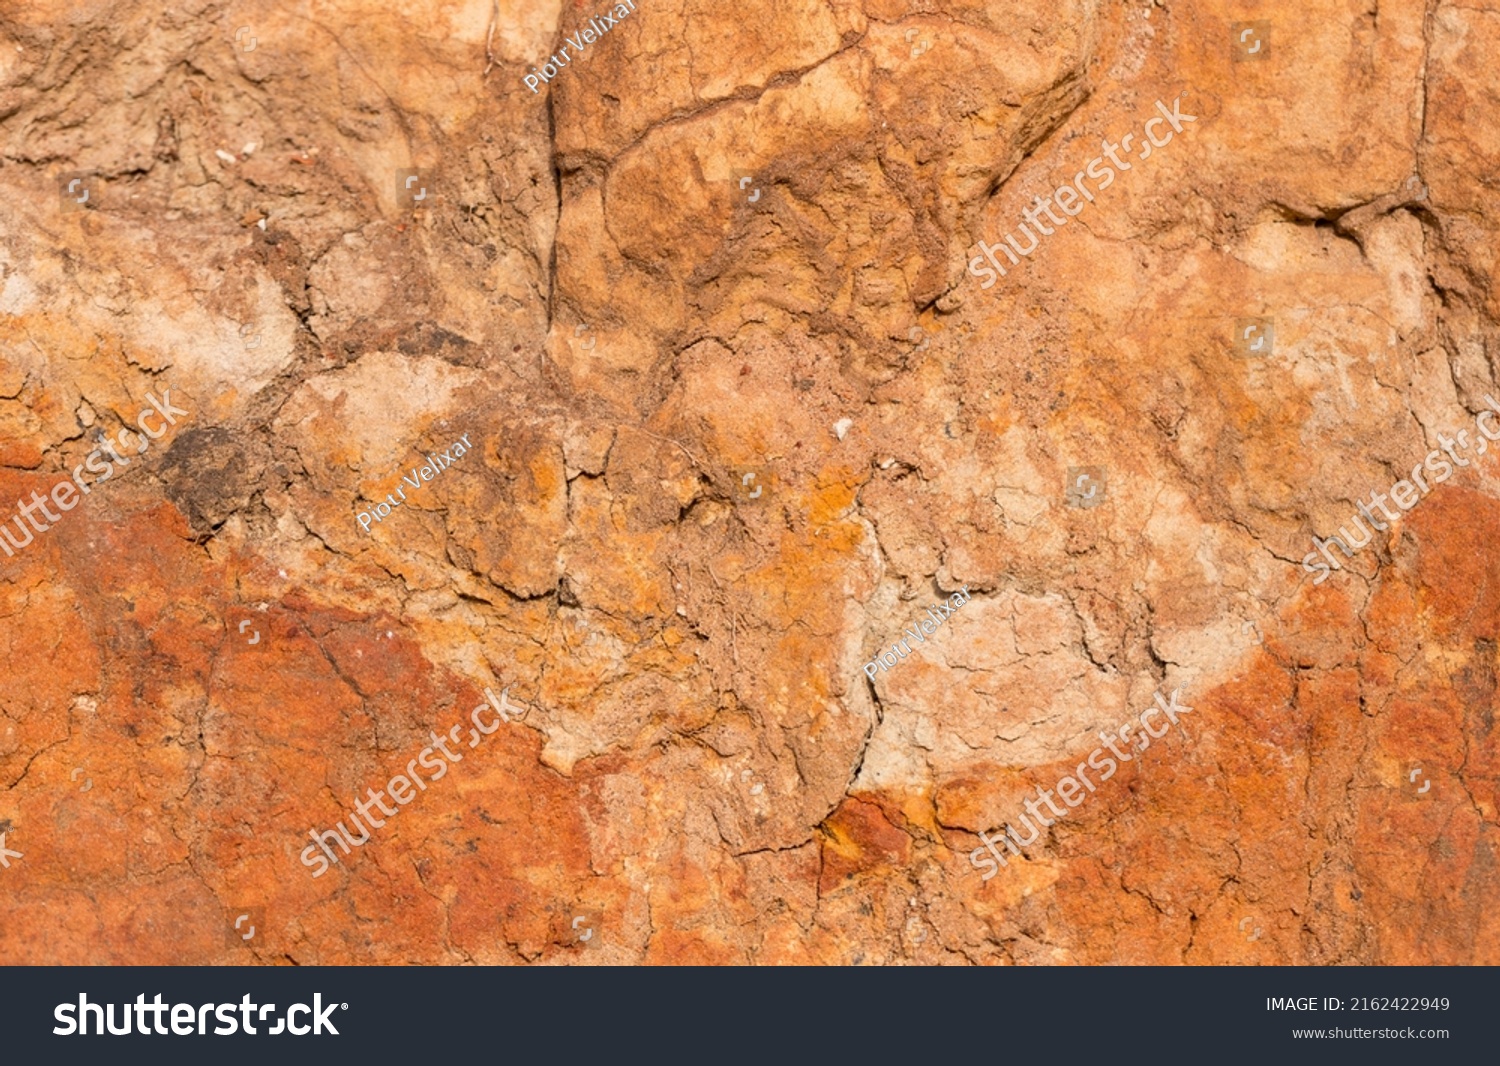 Sedimentary rocks with a high content of iron oxide. Red soil, loam. The texture of the soil. #2162422949